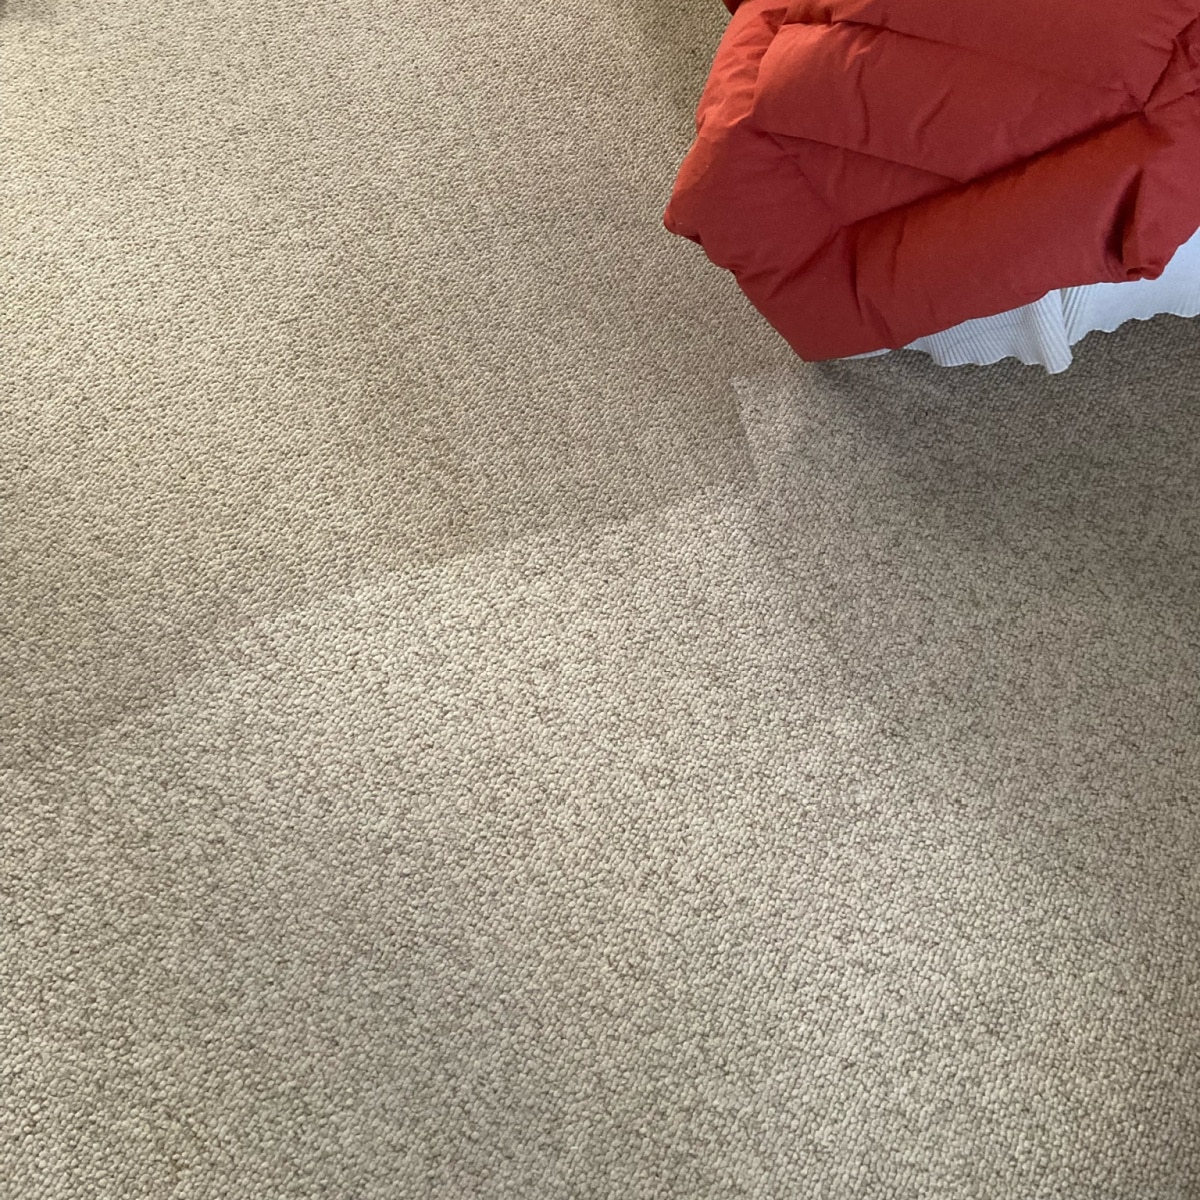 carpet cleaning in Paradise Valley, Arizona]